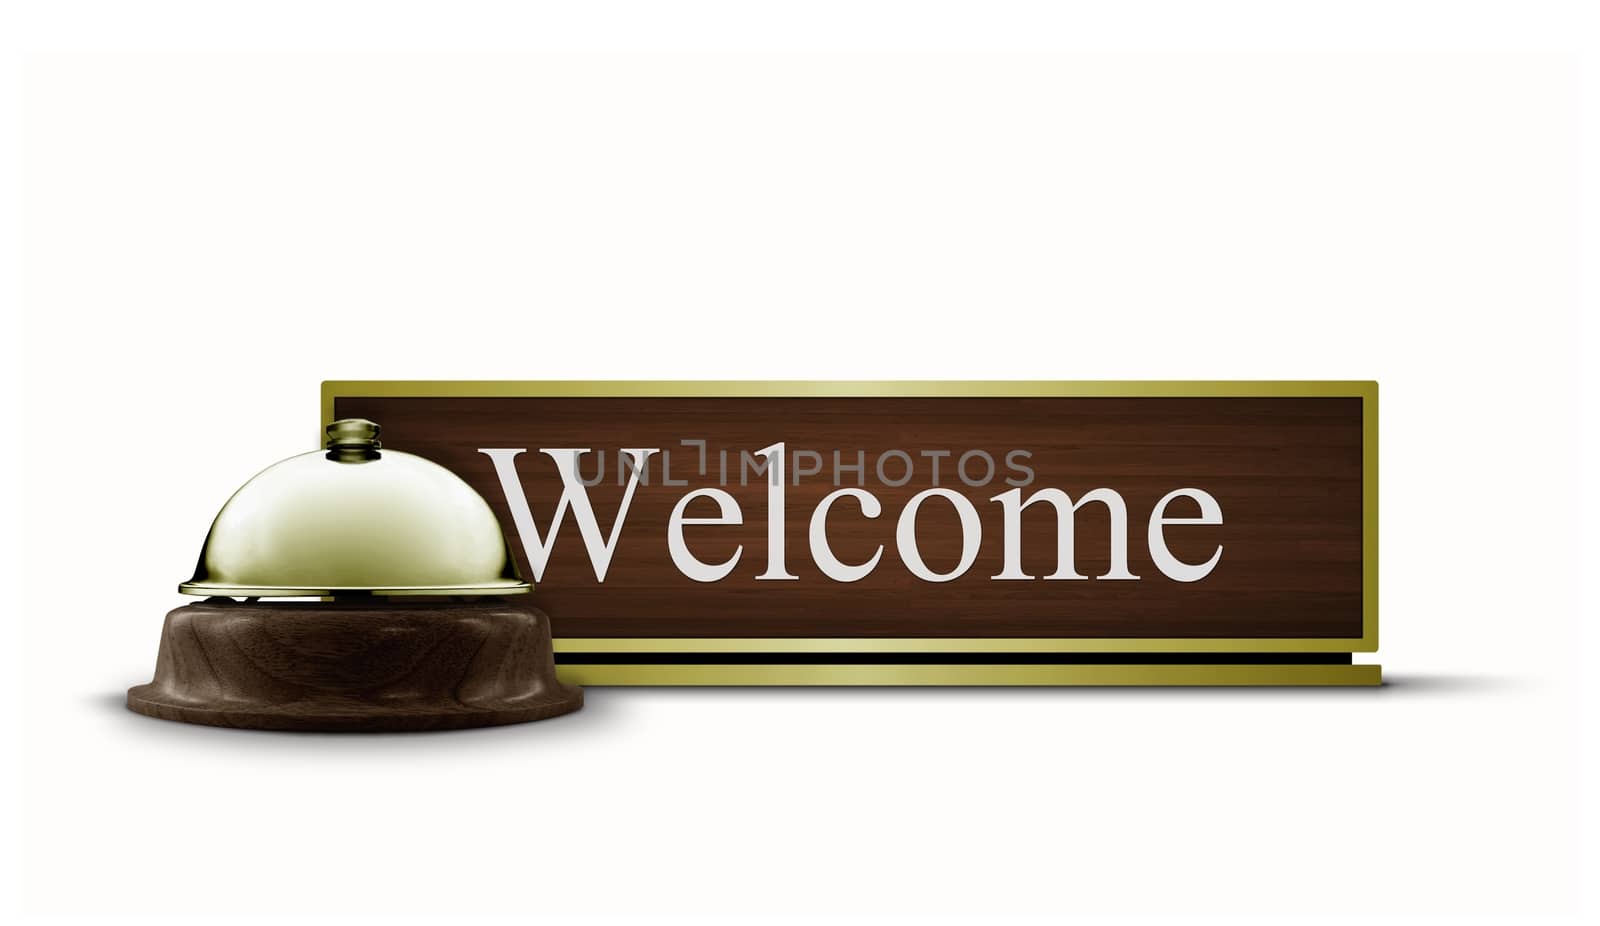 Welcome Desktop Sign and Service Bell by razihusin